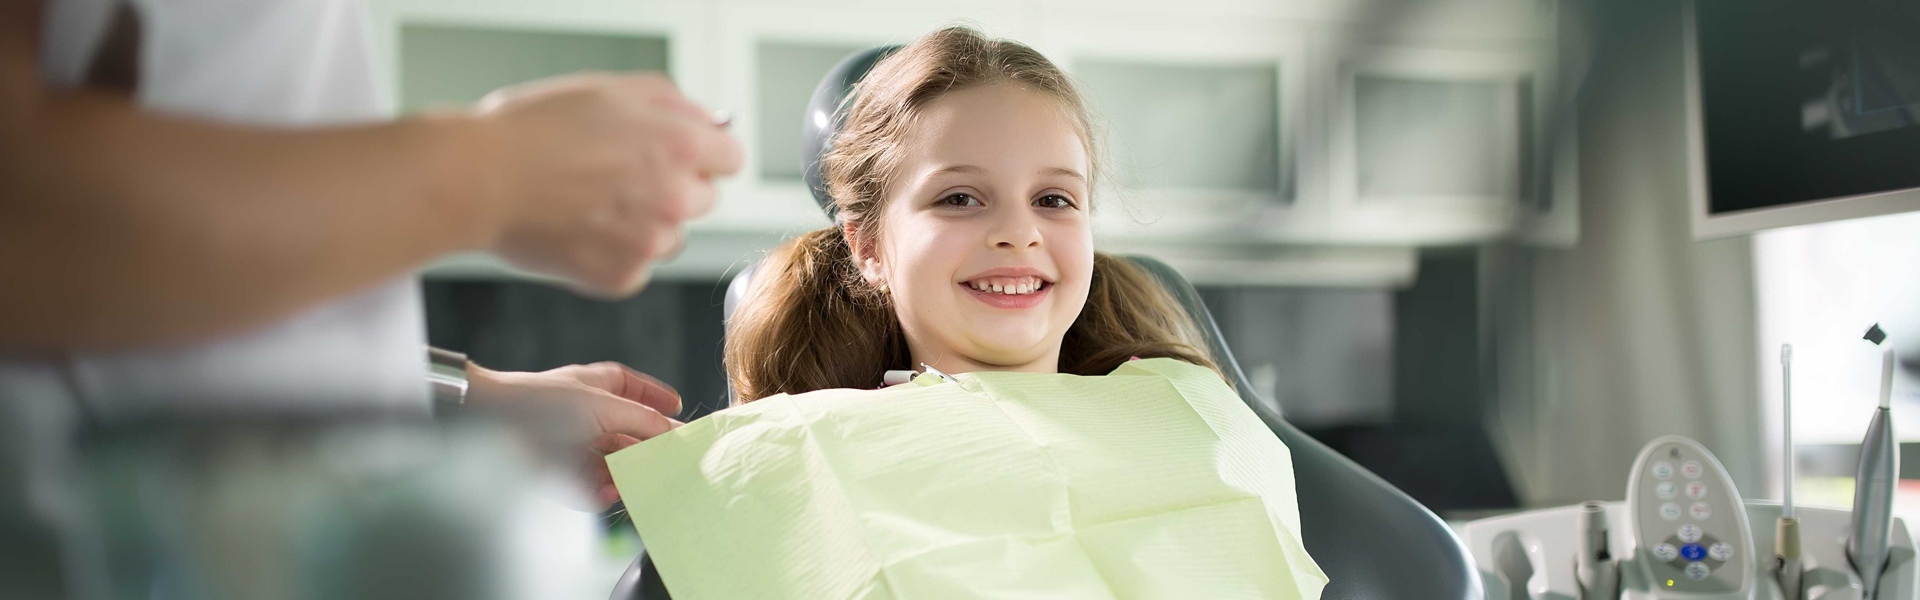 Everything You Need To Know About Pediatric Dental Exams And X Rays